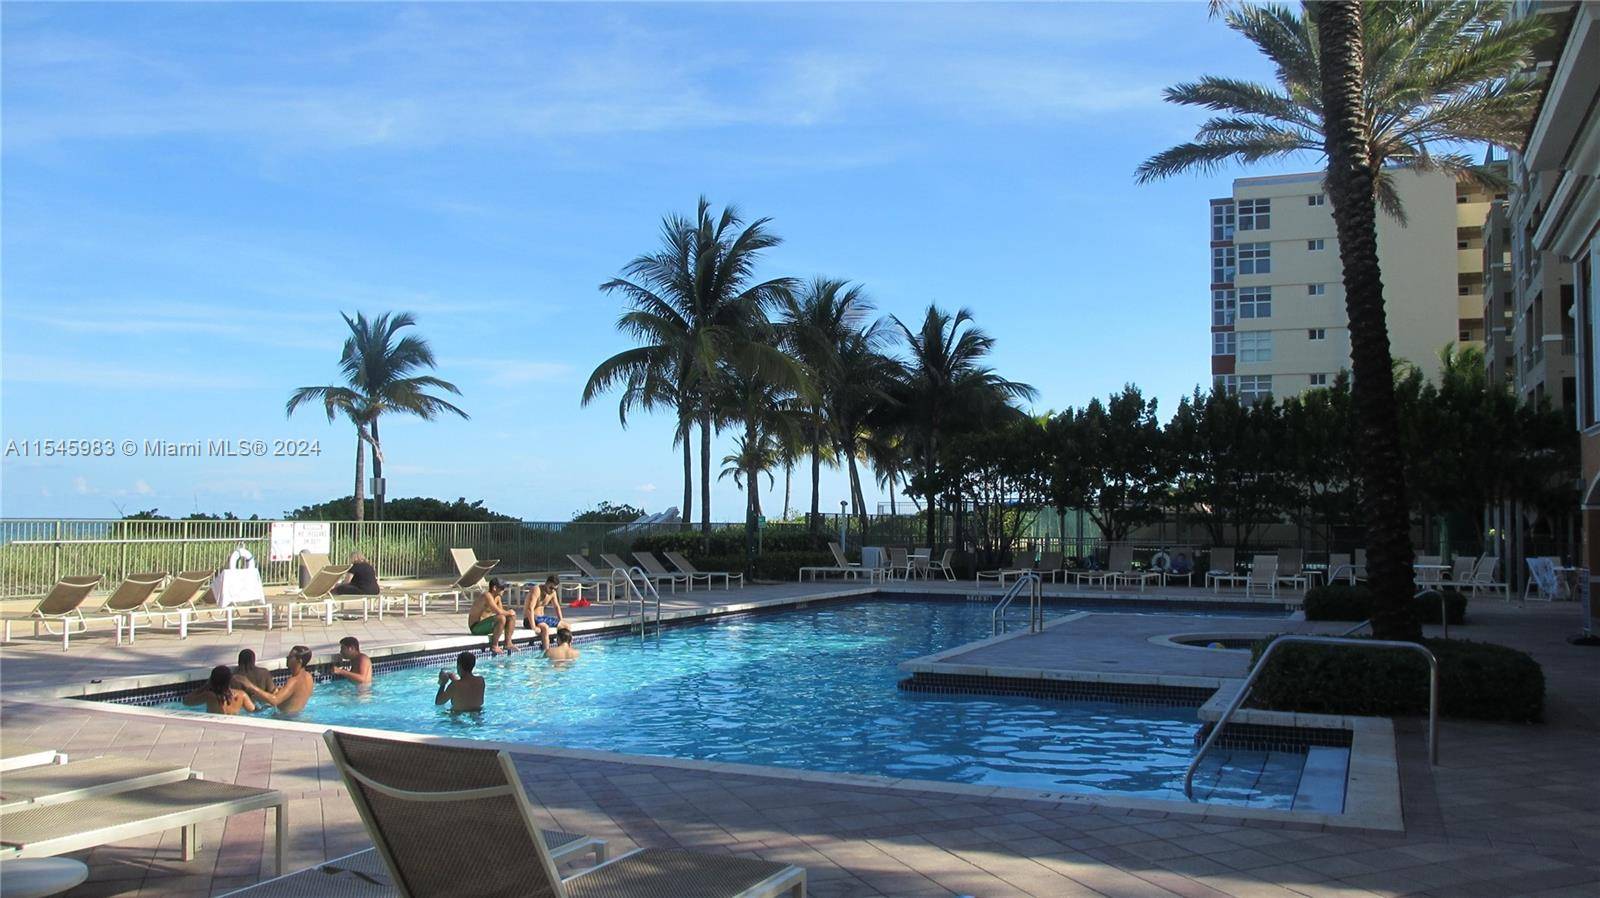 Oceanfront condo 2 beds 3 baths, furnished, completely equipped and ready to enjoy South Florida living.